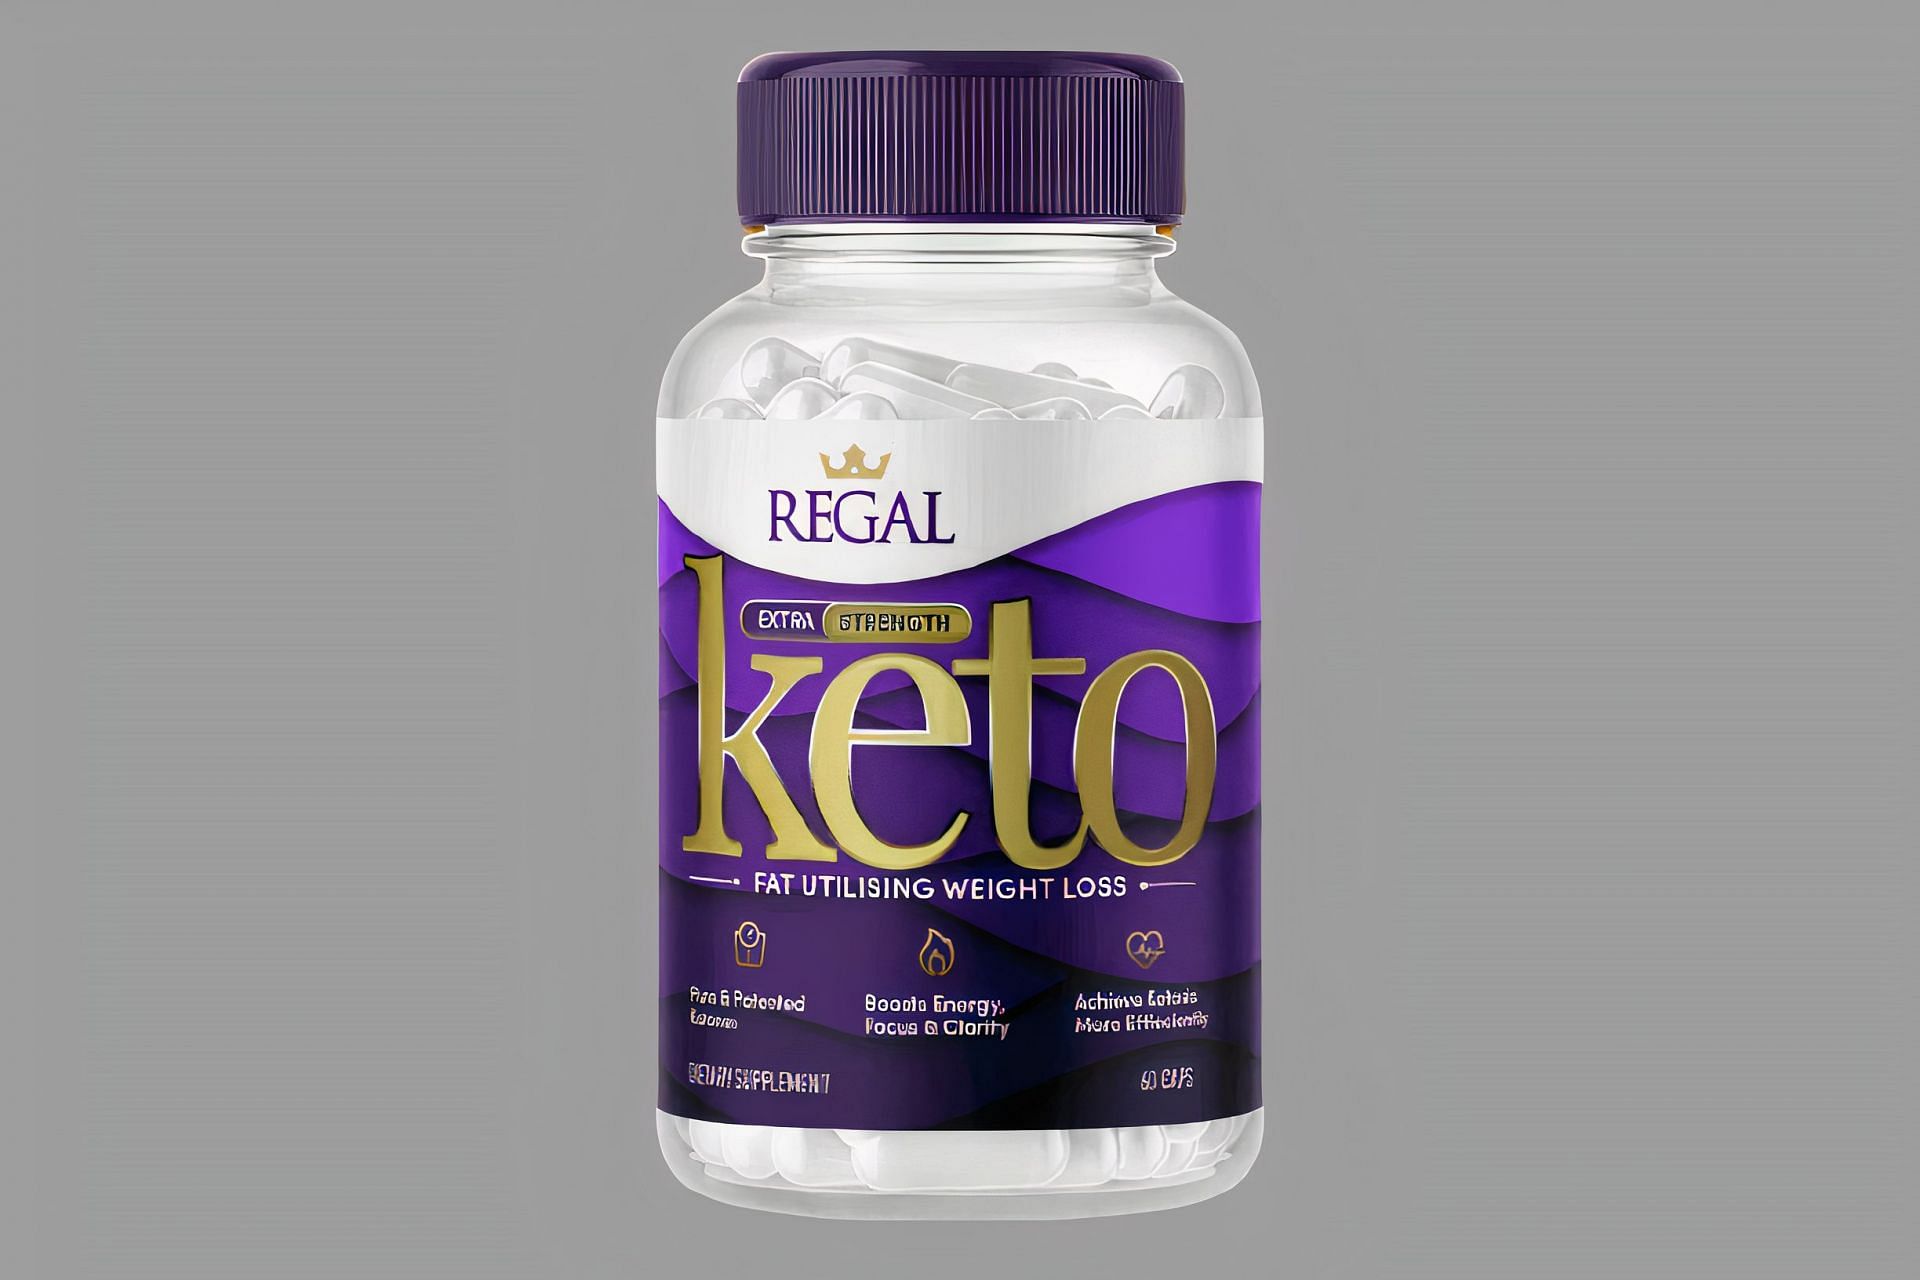 Are Regal Keto diet pills safe? Side effects, benefits, and weight loss expectations